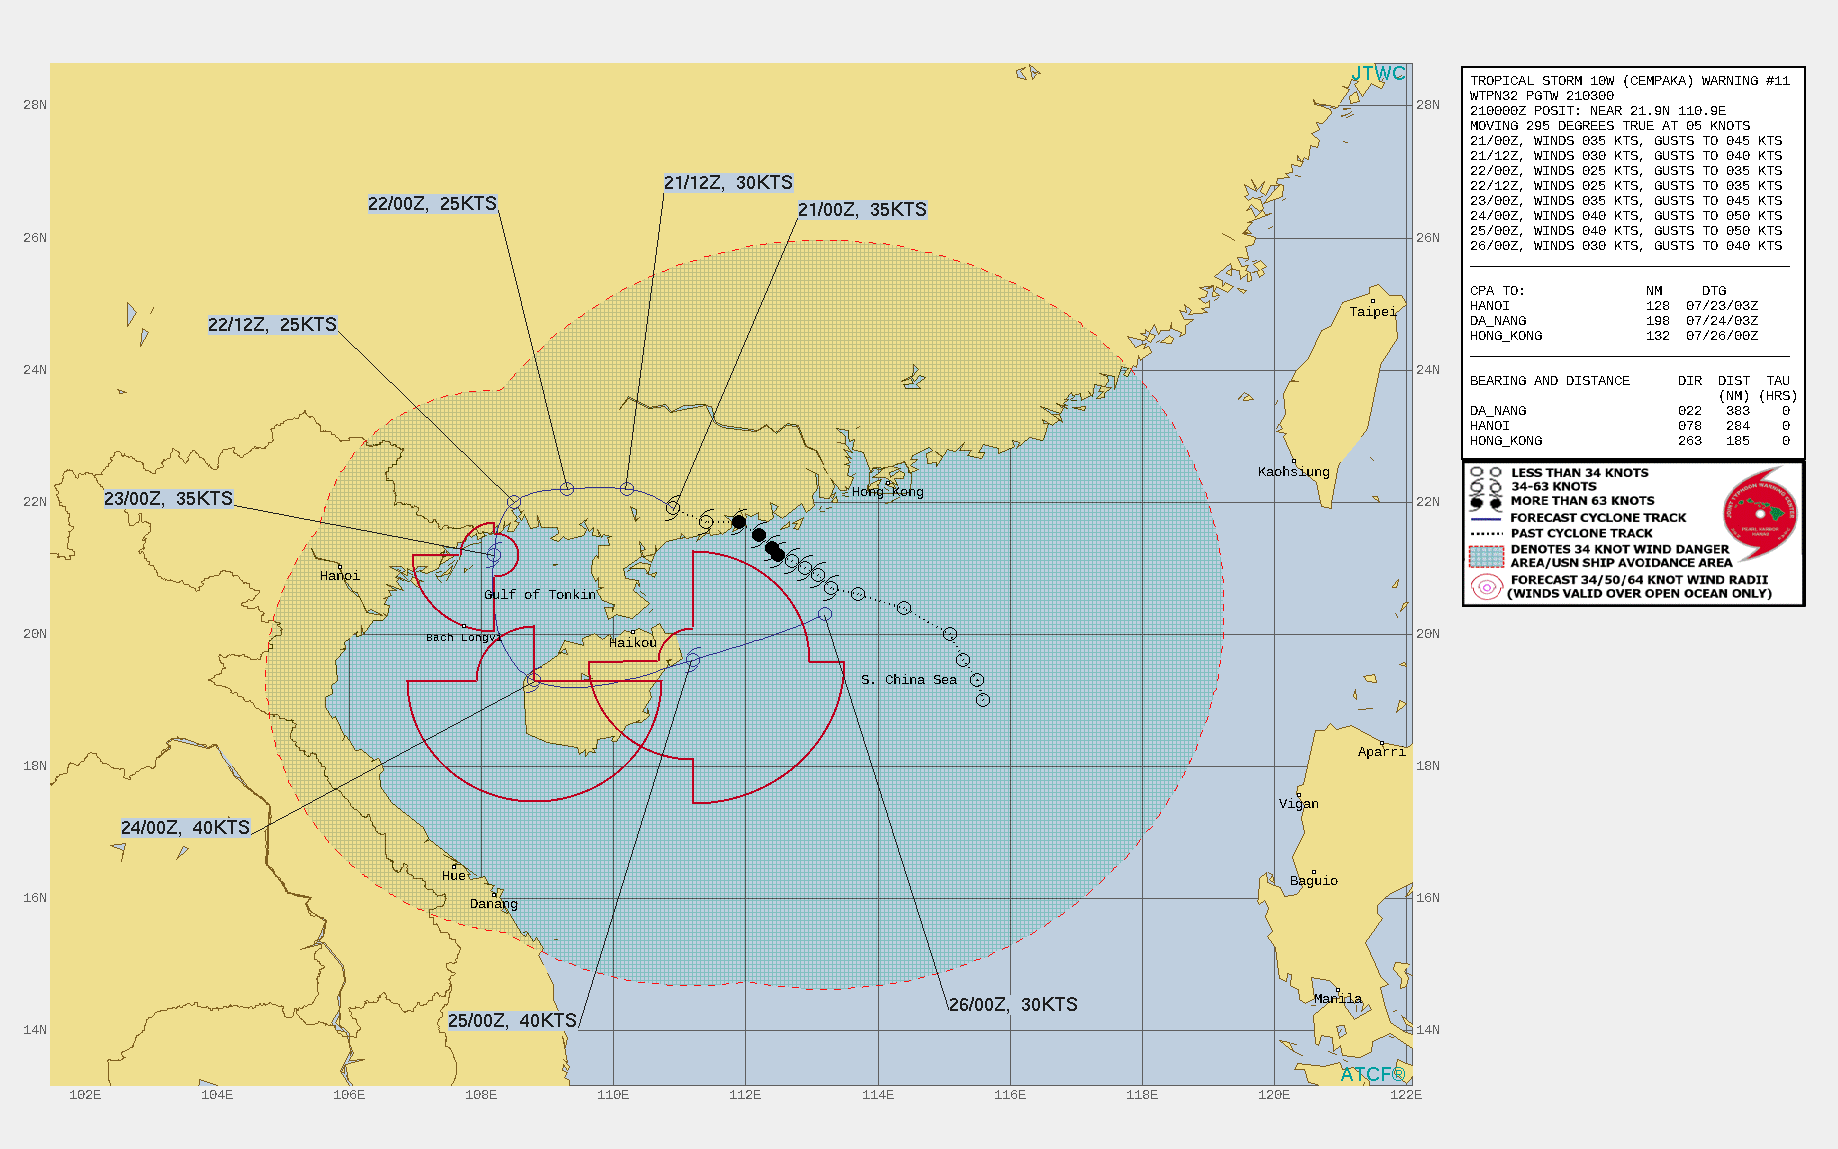 TS 10W(CEMPAKA). WARNING 11 ISSUED AT 20/03UTC.THERE ARE NO SIGNIFICANT CHANGES TO THE FORECAST FROM THE PREVIOUS WARNING.  FORECAST DISCUSSION: TS 10W WILL TRACK FURTHER INLAND AND GENERALLY WESTWARD UNDER A LOW REFLECTION OF THE STR. AFTER 36H, AS SECONDARY STR TO THE WEST WILL ASSUME STEERING AND DRIVE THE CYCLONE SOUTHWARD INTO THE GULF OF TONKIN (GOT) AND INTO HAINAN BY 72H. AFTERWARD, THE SYSTEM WILL DRIFT EAST-NORTHEASTWARD WITH AN AMPLIFIED MONSOON FLOW IN THE SOUTH CHINA SEA. THE RUGGED TERRAIN AND INCREASED VERTICAL WIND SHEAR WILL CONTINUE TO ERODE THE SYSTEM DOWN TO 25KNOTS BY 24H. HOWEVER, AFTER IT EXITS BACK ONTO WATER IN THE GOT, IT WILL REGAIN TS INTENSITY MOMENTARILY UNTIL IT BECOMES EXPOSED TO HIGH VERTICAL WIND SHEAR IN THE SOUTH CHINA SEA ASSOCIATED WITH THE SOUTHWEST MONSOON. THERE IS A DISTINCT POSSIBILITY THAT TS CEMPAKA WILL DISSIPATE OVER LAND IN THE NEXT 36HRS.